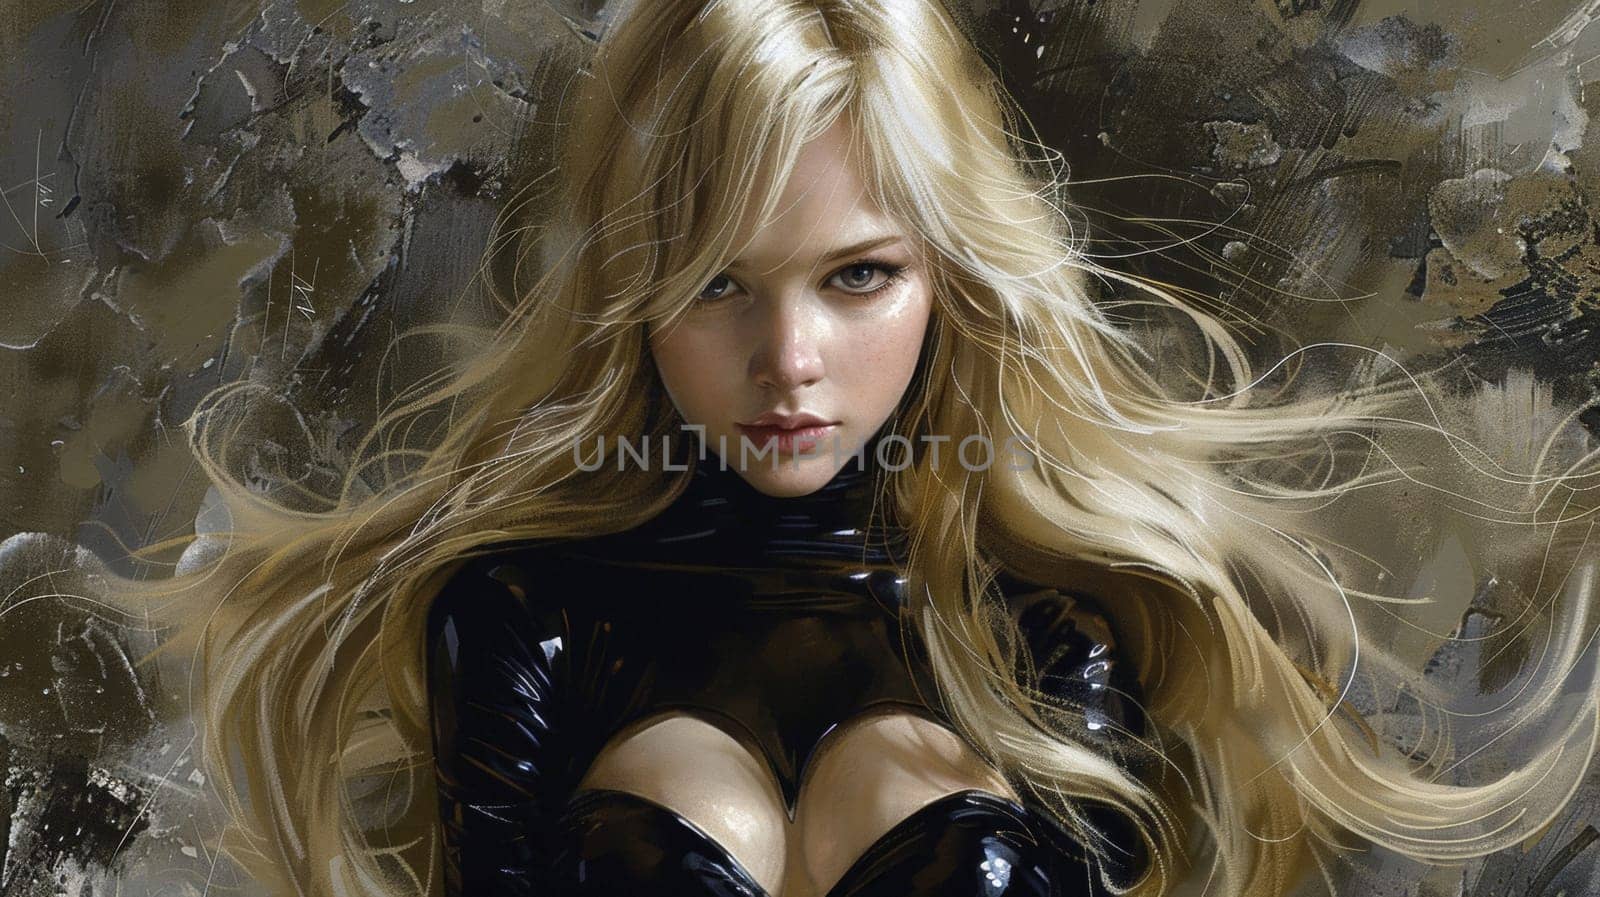 A painting of a woman in black latex with long blonde hair, AI by starush